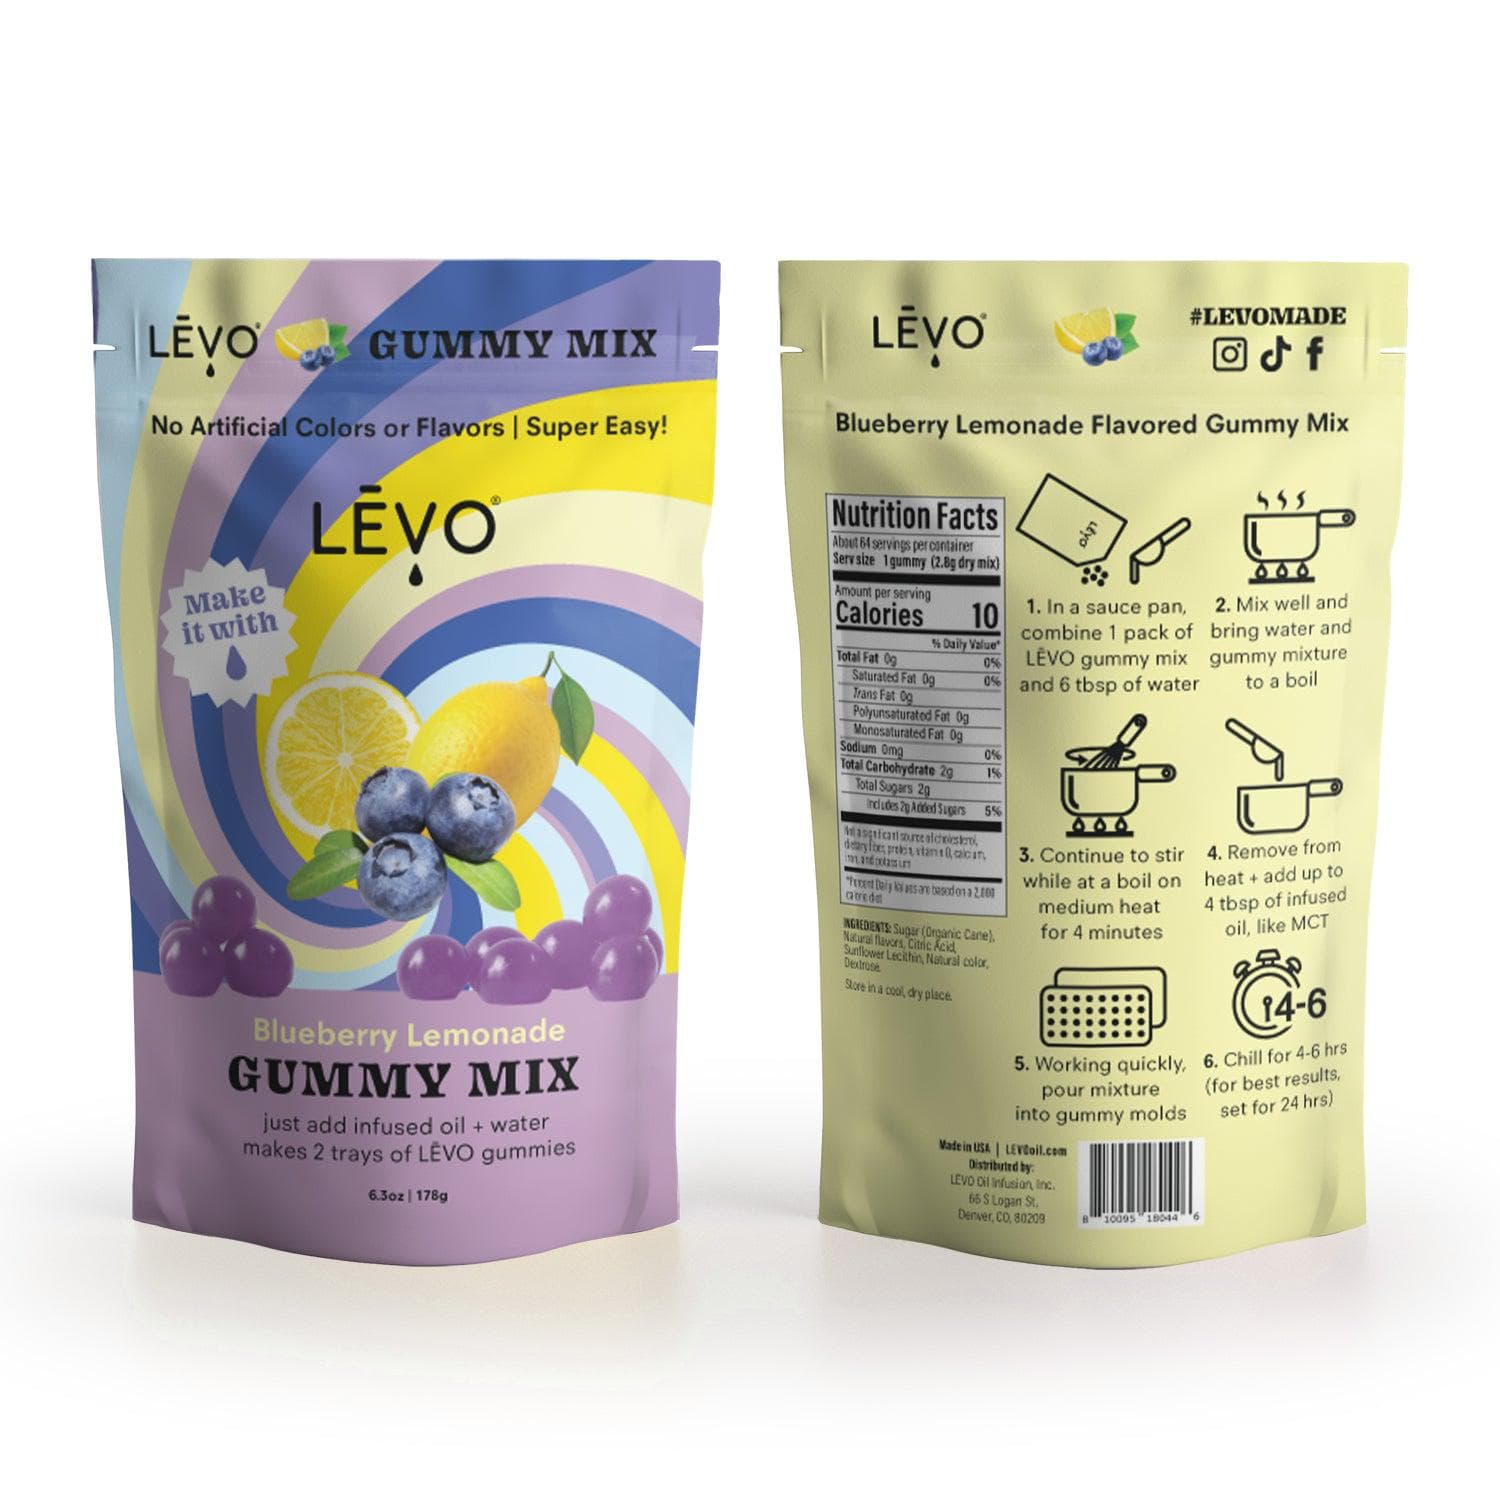 Blueberry Lemonade LEVO gummy mix, made with all natural flavors and no artificial colors. Make your gummies pop with LEVO infused MCT or Coconut Oil. LEVOoil.com has everything you need to make your own infused gummies at home. Share your infused gummies with friends.